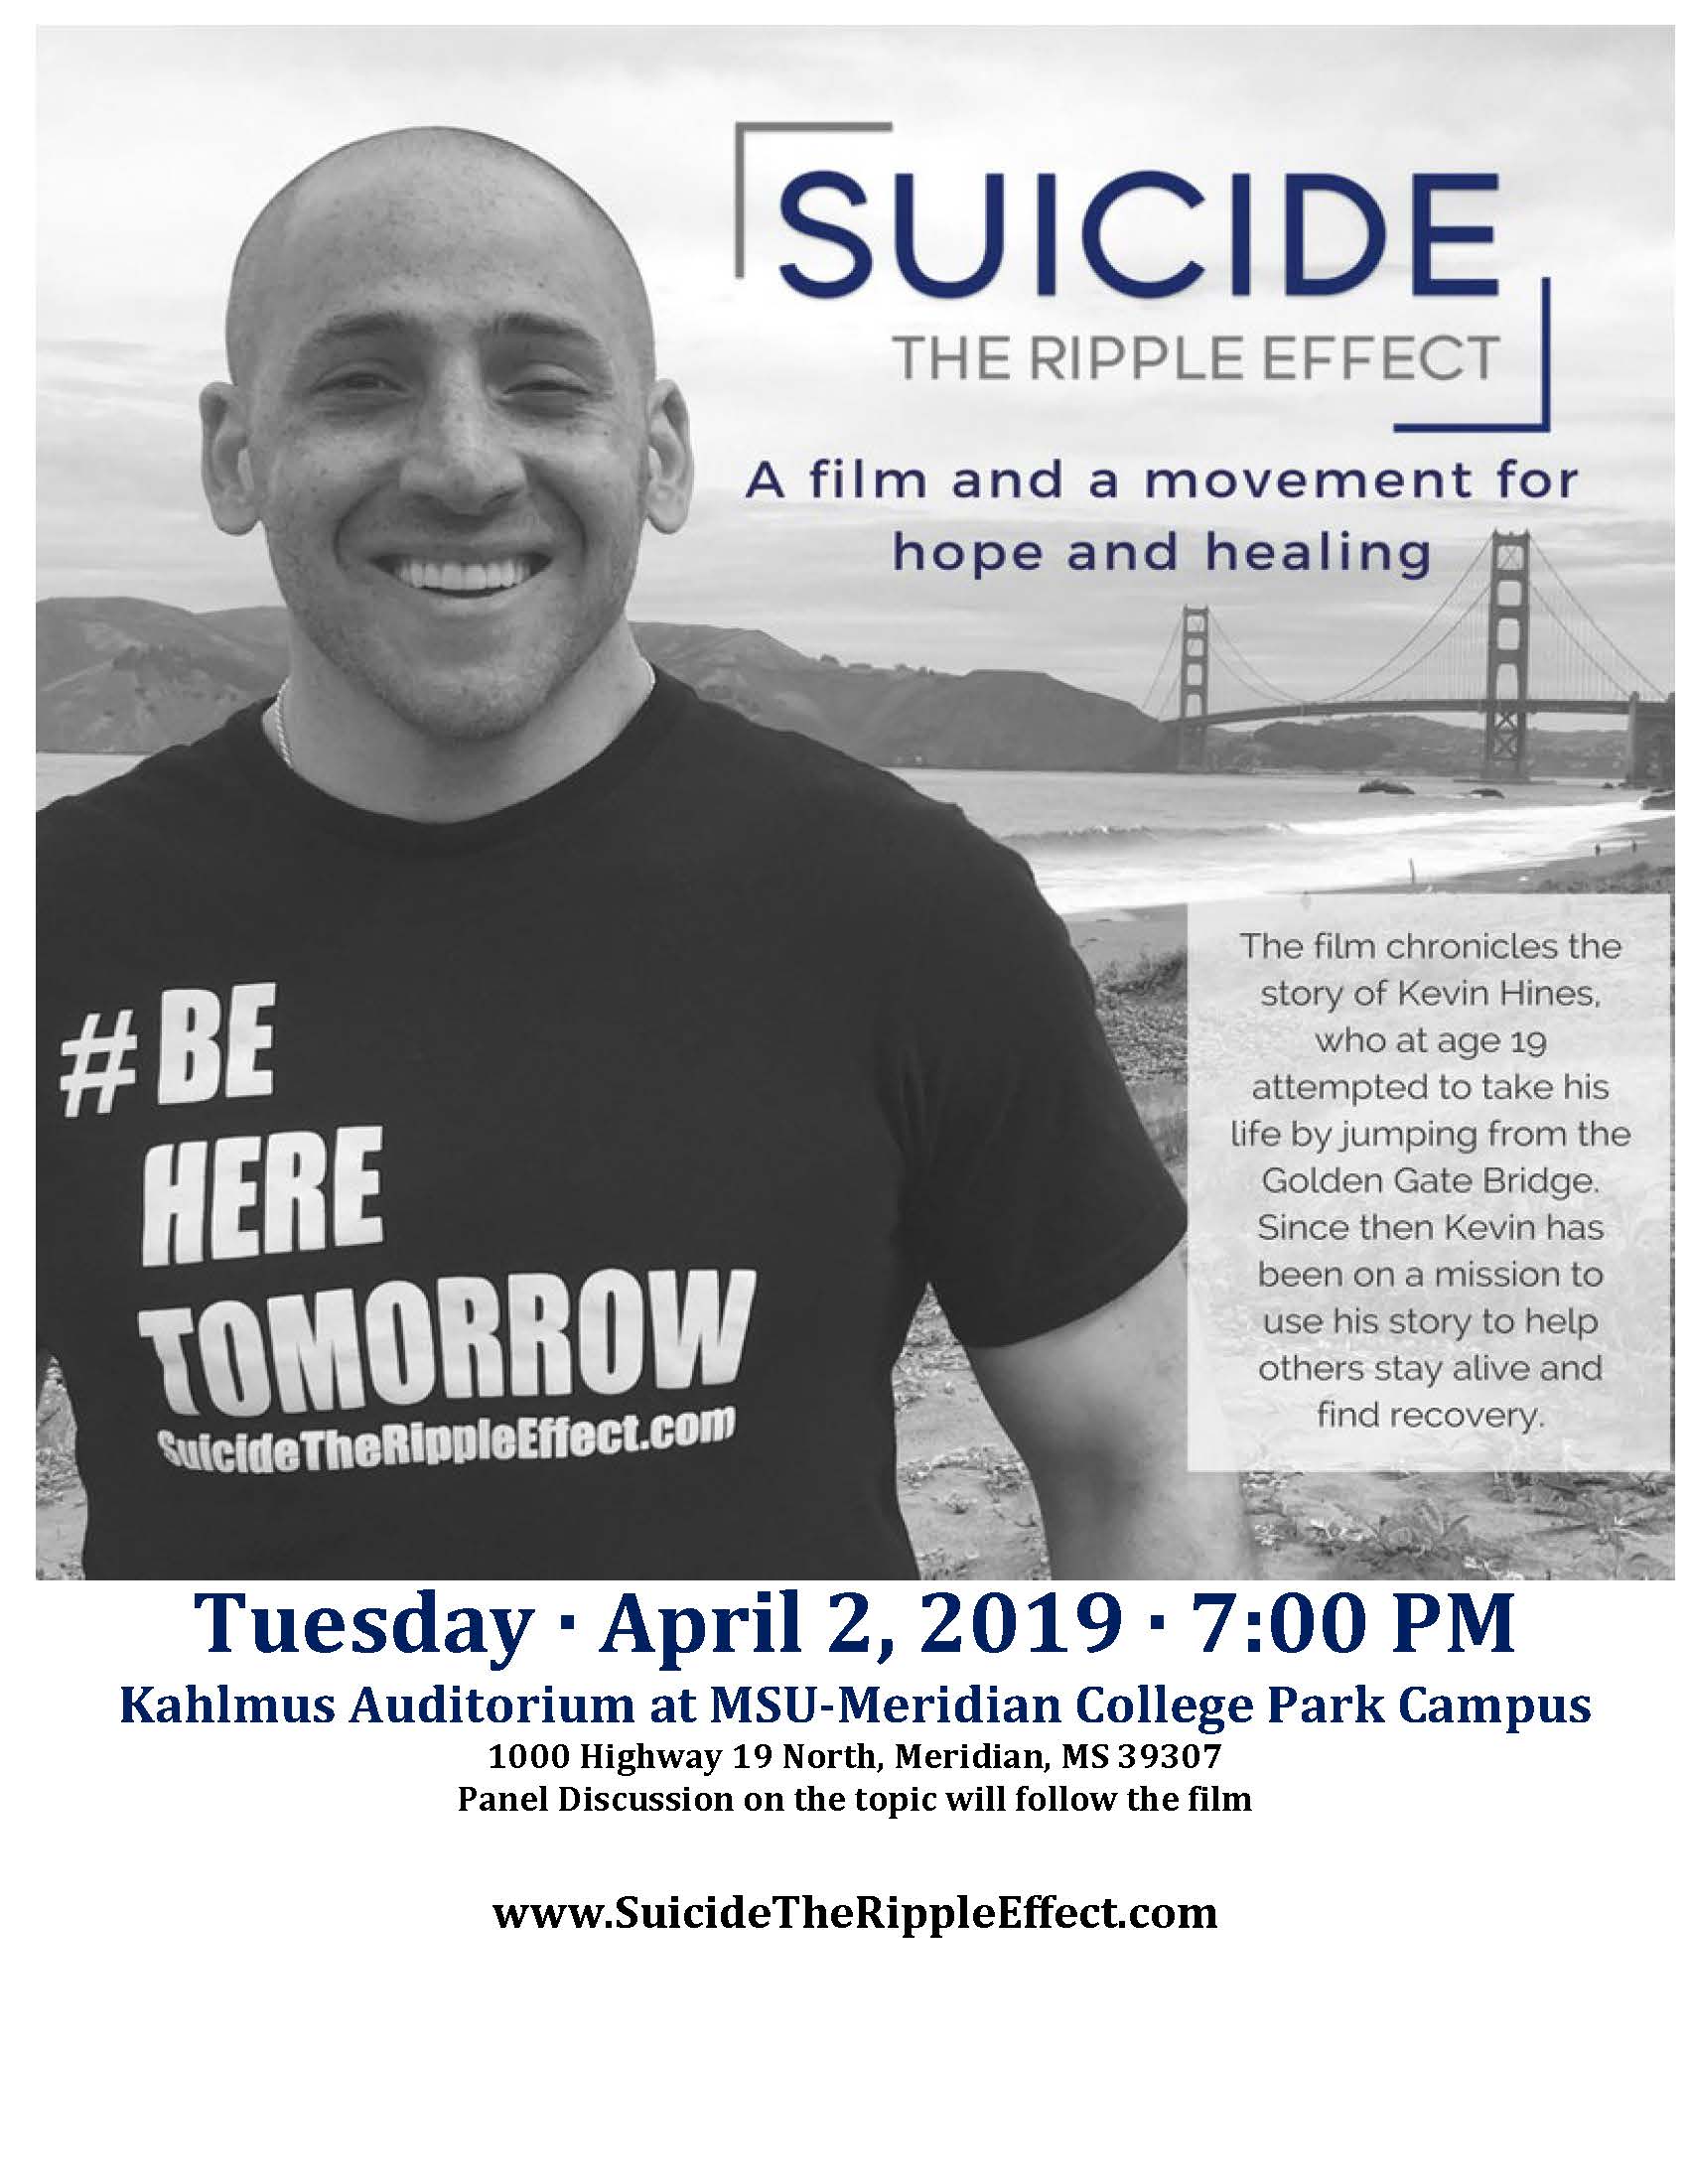 Flyer of the film showing of Suicide The Ripple Effect